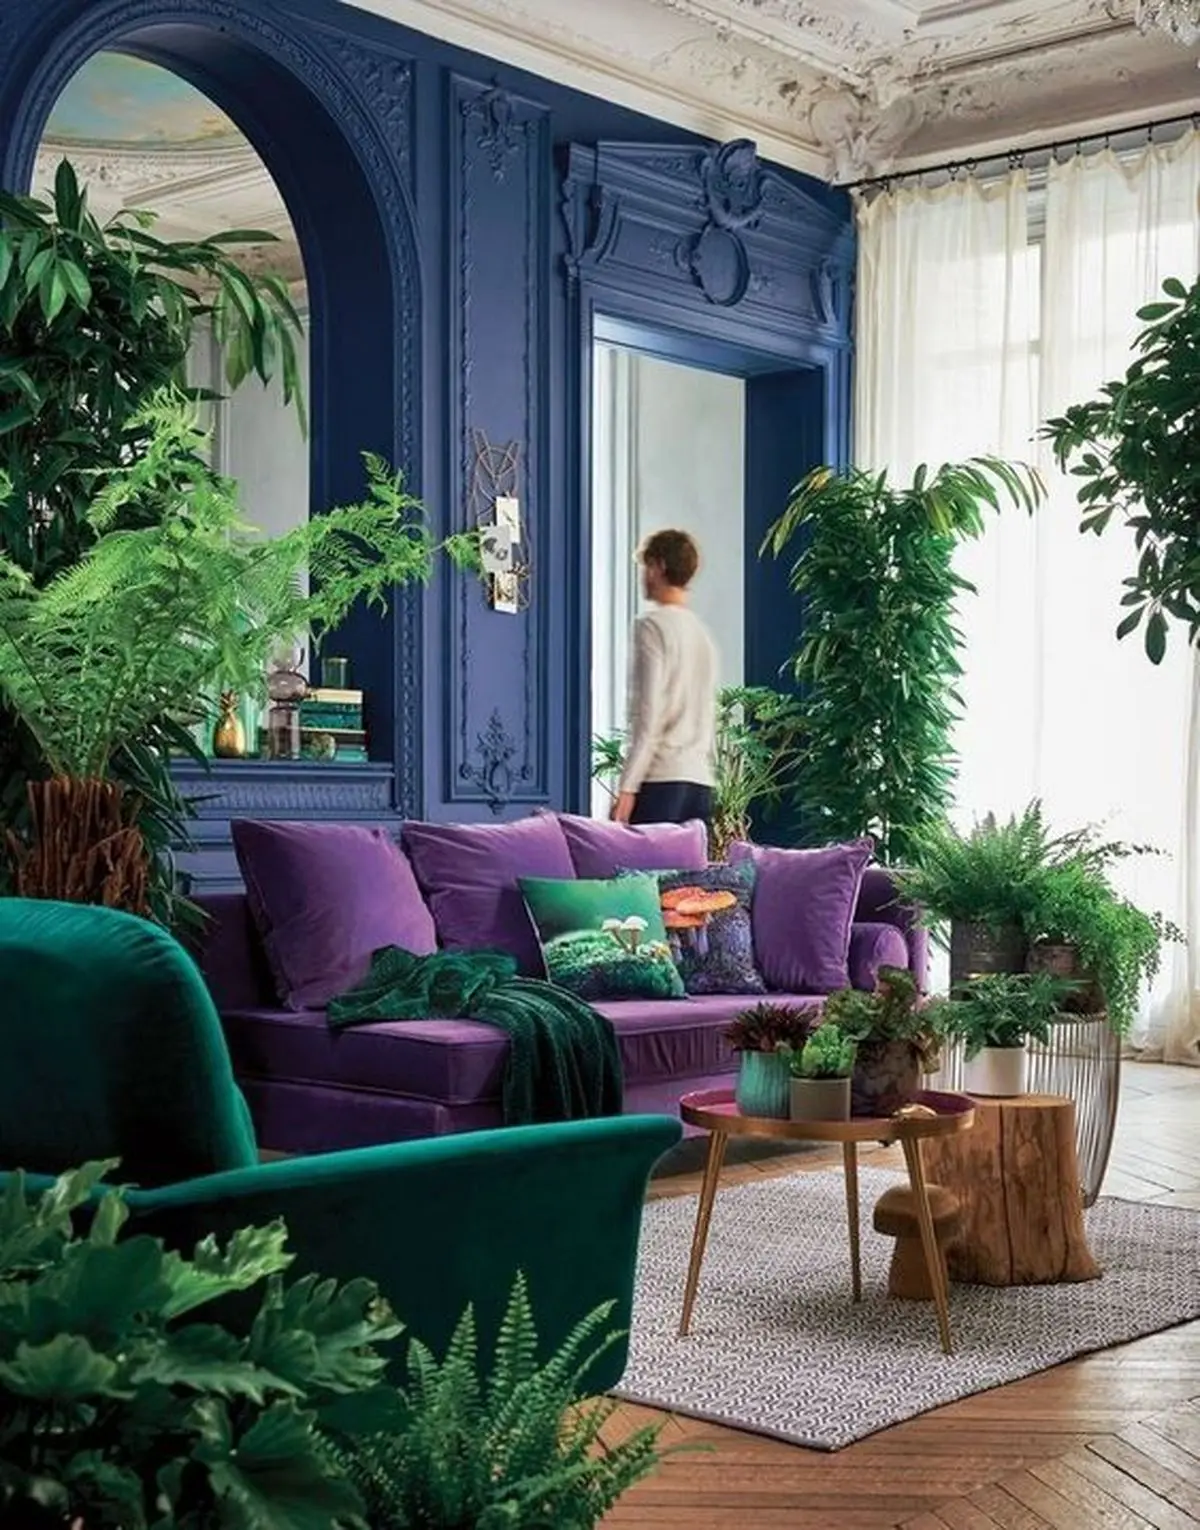 03-a-bright-living-room-with-bold-blue-walls-a-purple-sofa-an-emerald-chair-potted-greenery-and-a-large-mirror